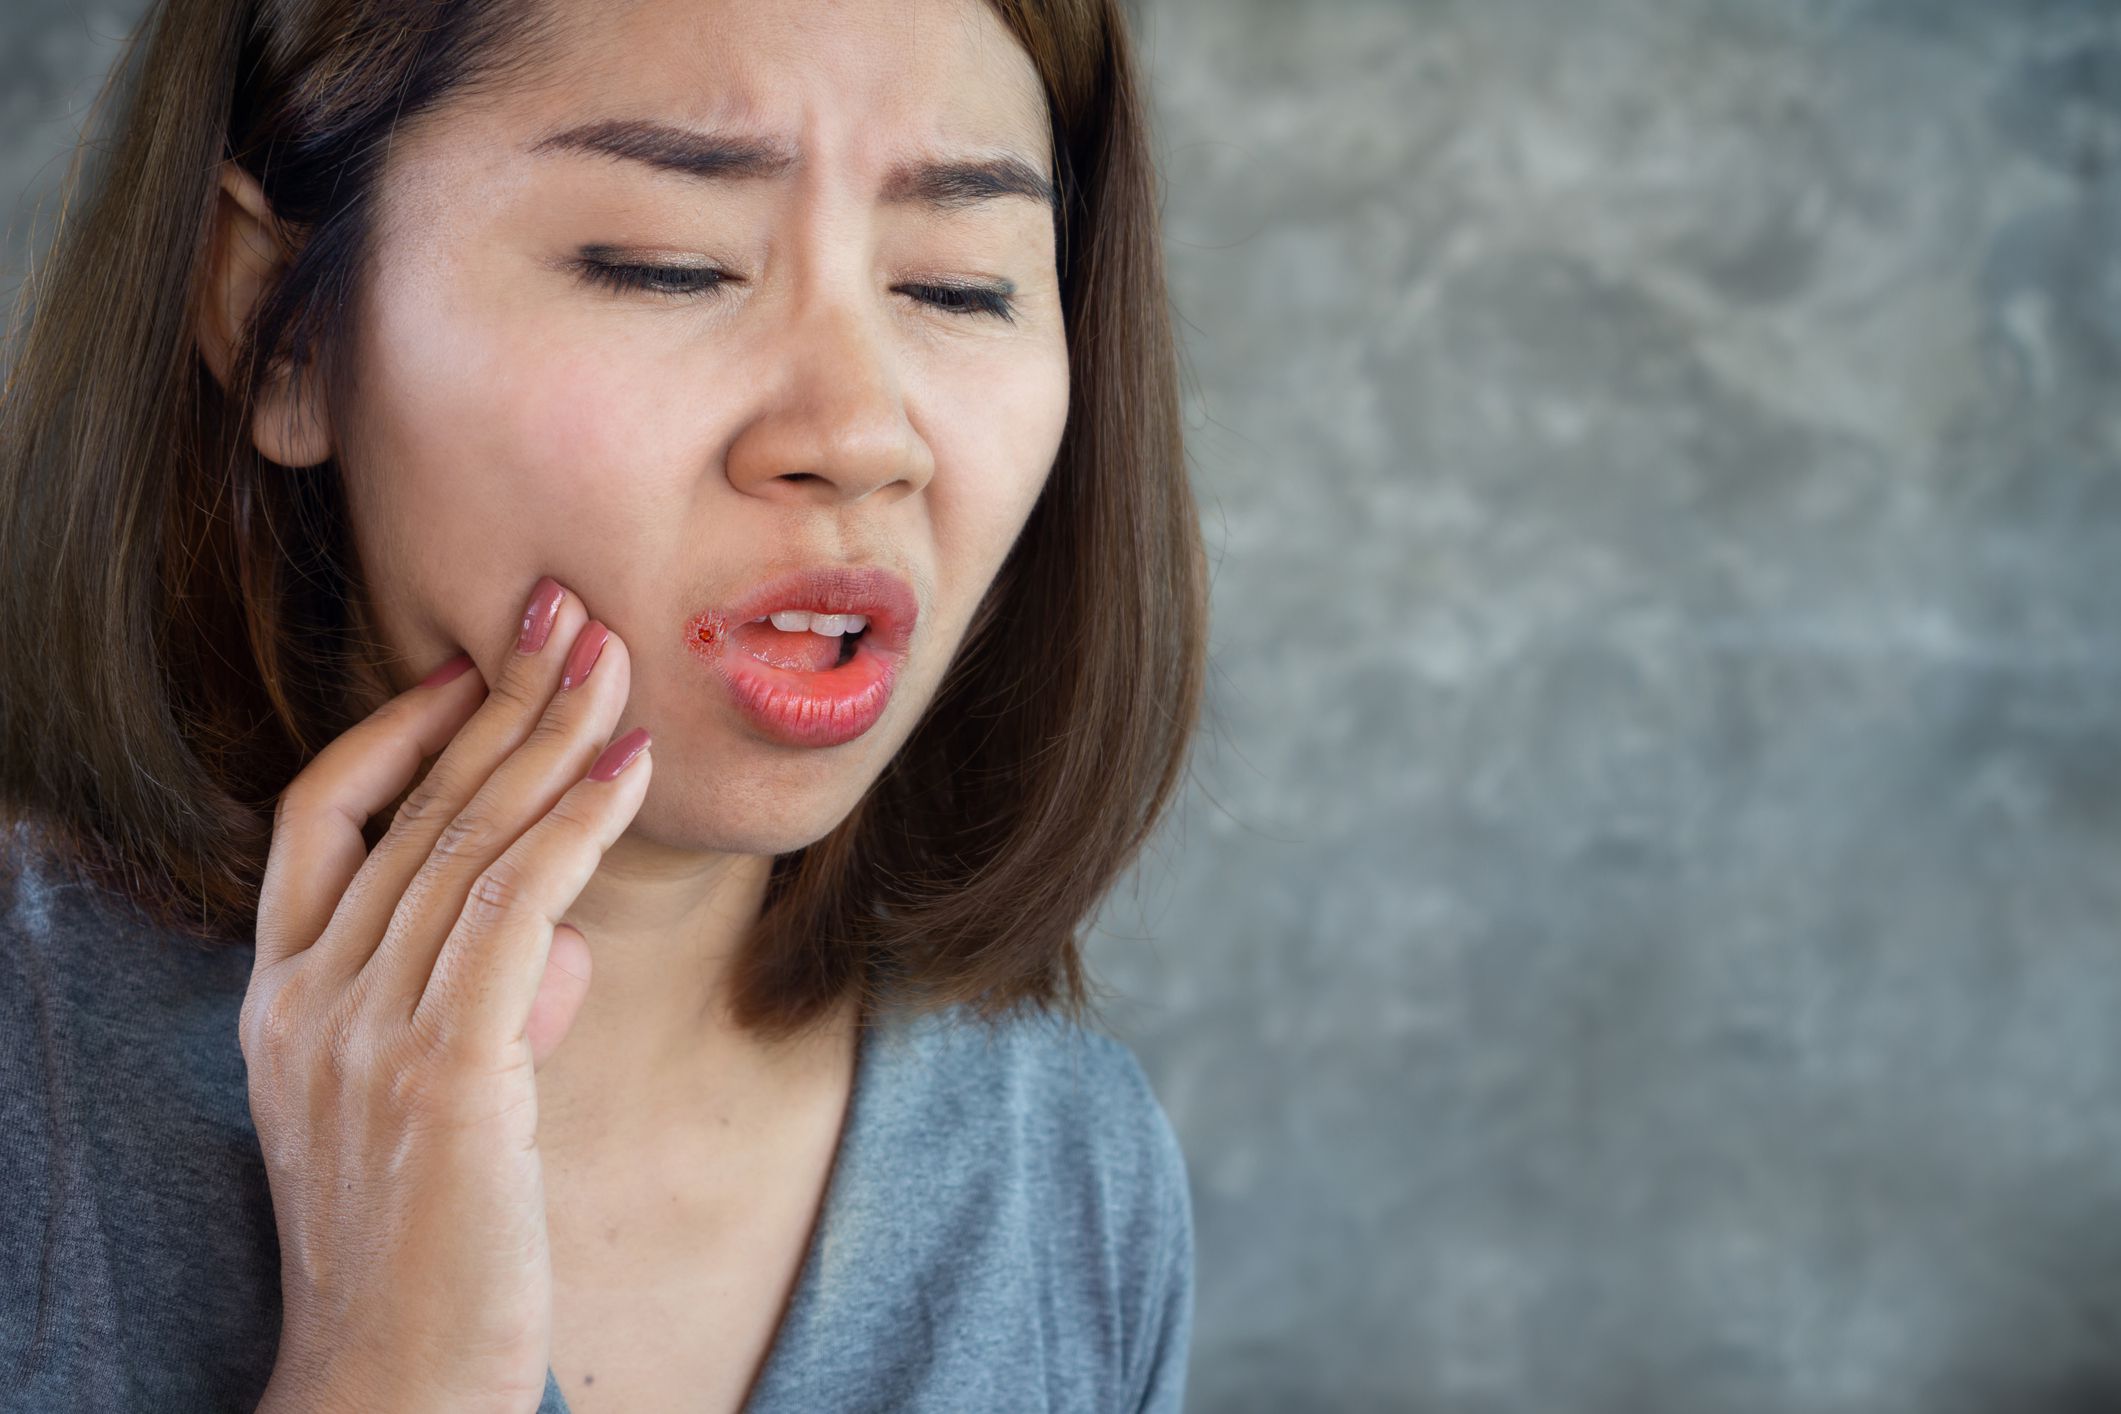 <p>Canker sores and other mouth ulcers also could be linked to <a href="https://www.ncbi.nlm.nih.gov/pubmed/3165514/">iron deficiency</a>, or low levels of B vitamins. Twenty-eight percent of patients with mouth sores had <a href="https://www.ncbi.nlm.nih.gov/pmc/articles/PMC3576783/">B1, B2, or B6 deficiencies</a> according to one study.</p><p>Just like the previous section, you can improve your levels of these vitamins and minerals with meat, poultry, fish, beans, nuts, seeds and whole grains. A diet full of these foods can help assuage many nutrient shortages, so keep that in mind. The <a href="https://ods.od.nih.gov/factsheets/Riboflavin-HealthProfessional/">B vitamins</a> can be increased also with starchy vegetables and eggs.</p>